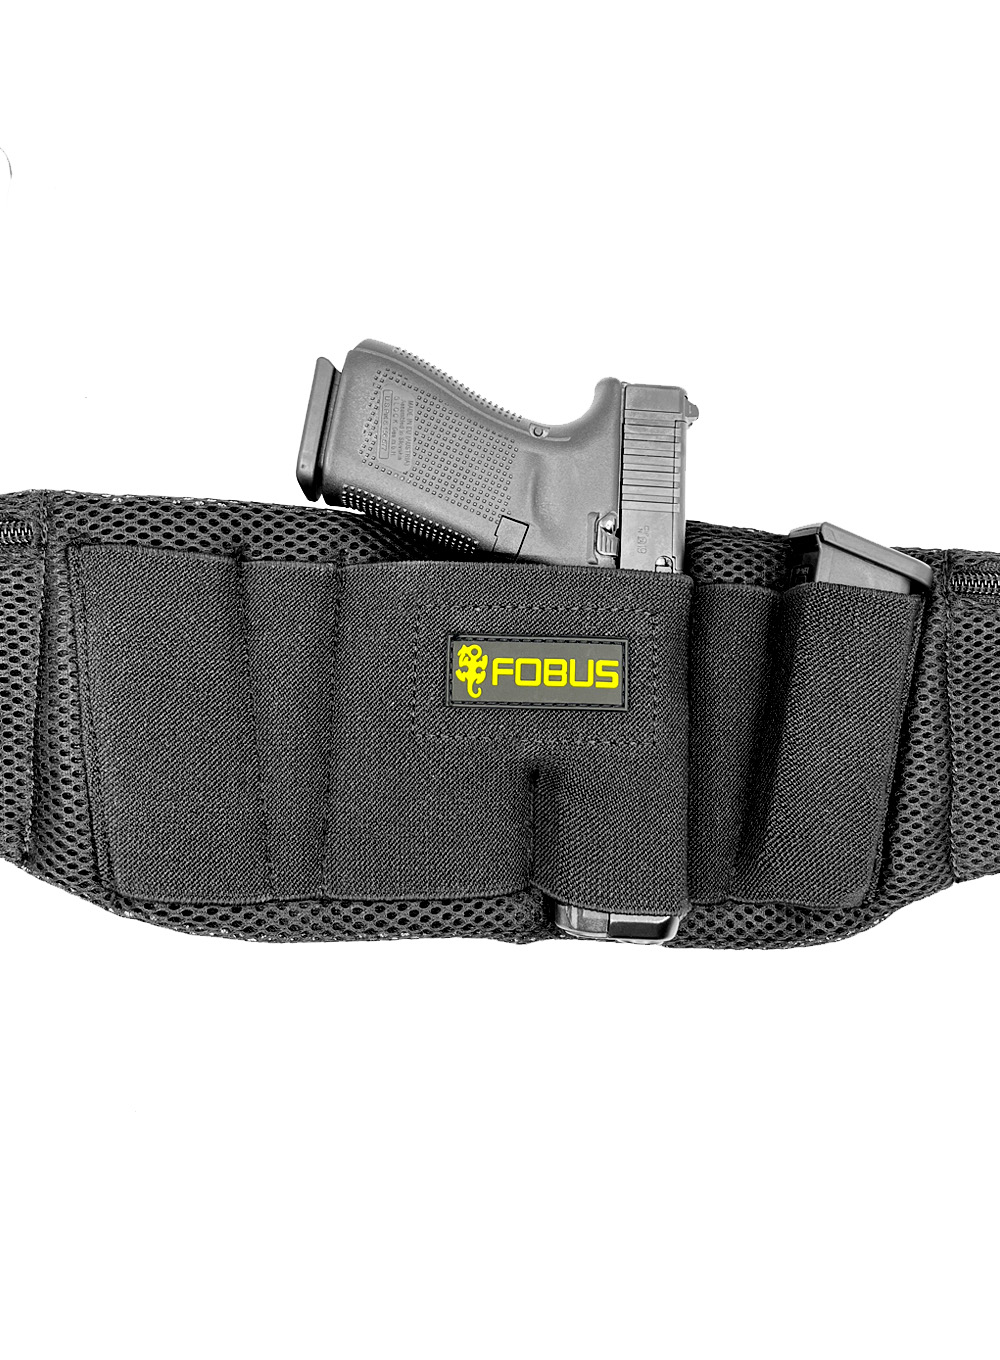 Fobus Belly Band Holster